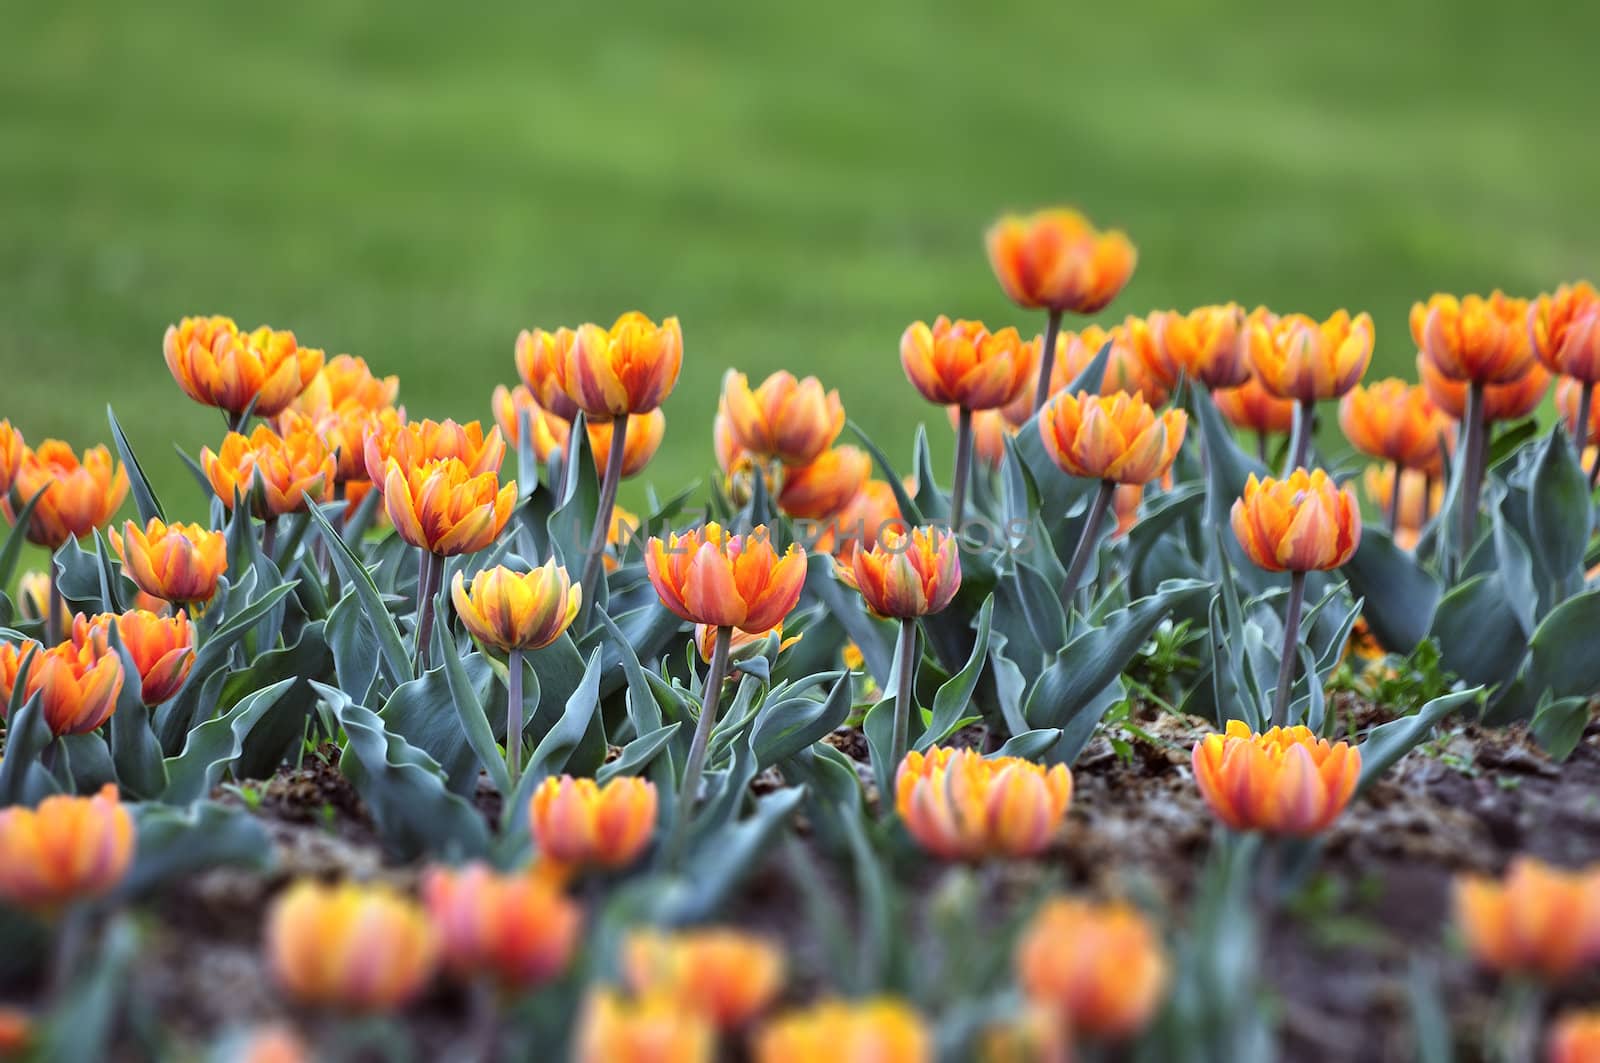 A double-late tulip or “peony” tulip, as they are often called, Orange Princess represents perfection among its kind.